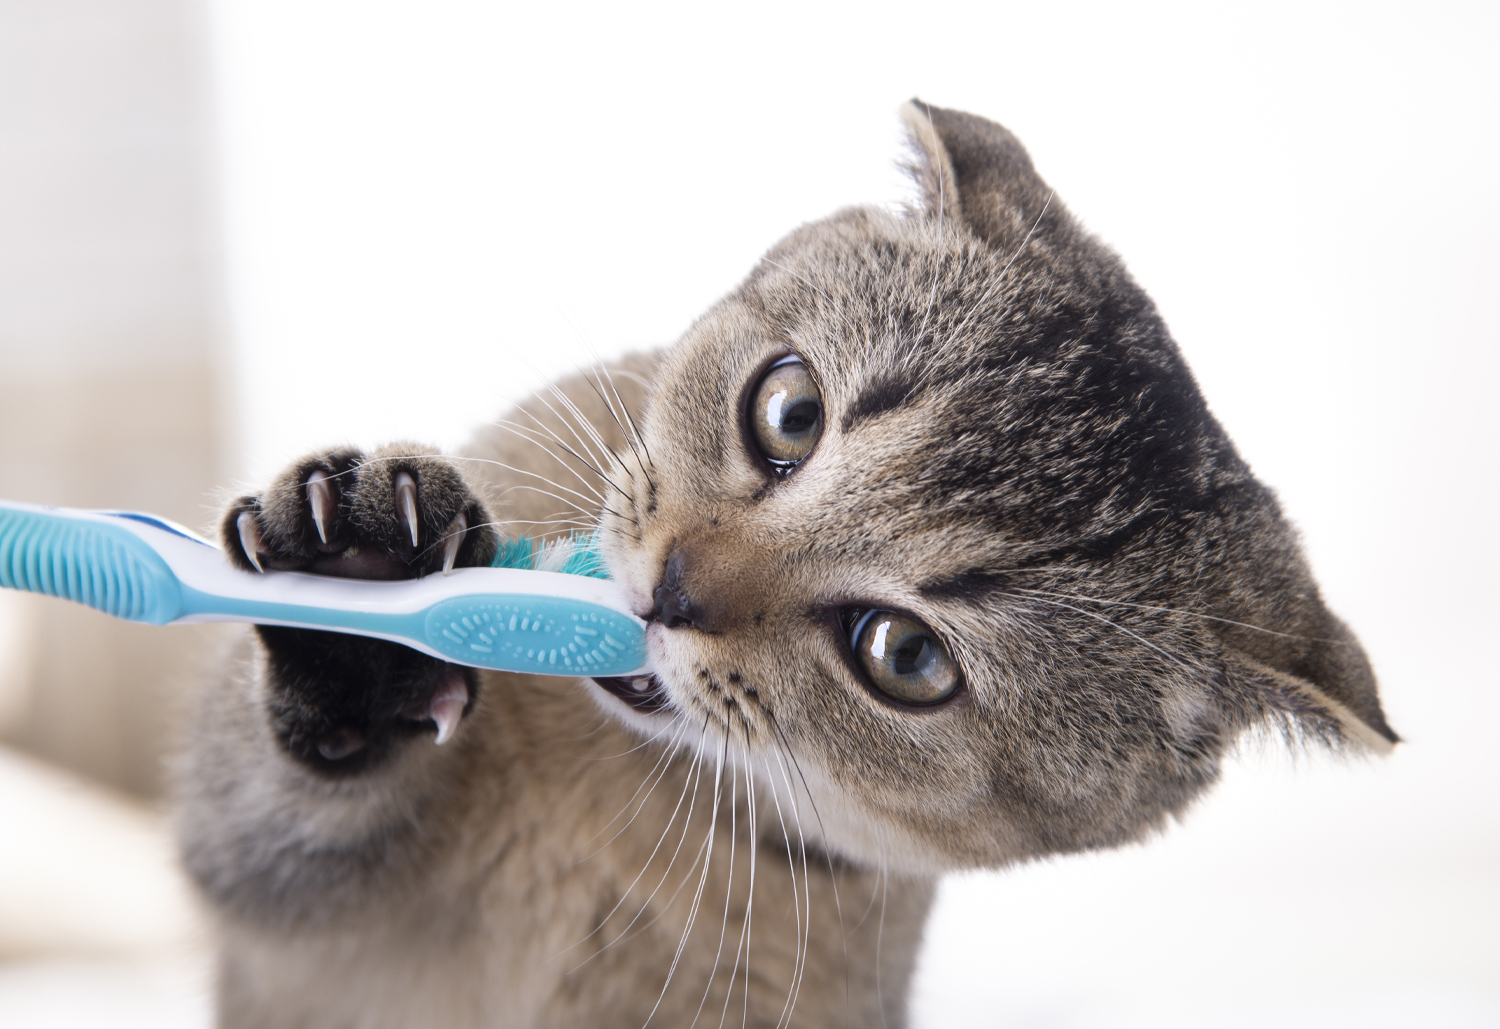 Cath with Toothbrush - February is Pet Dental Health Month